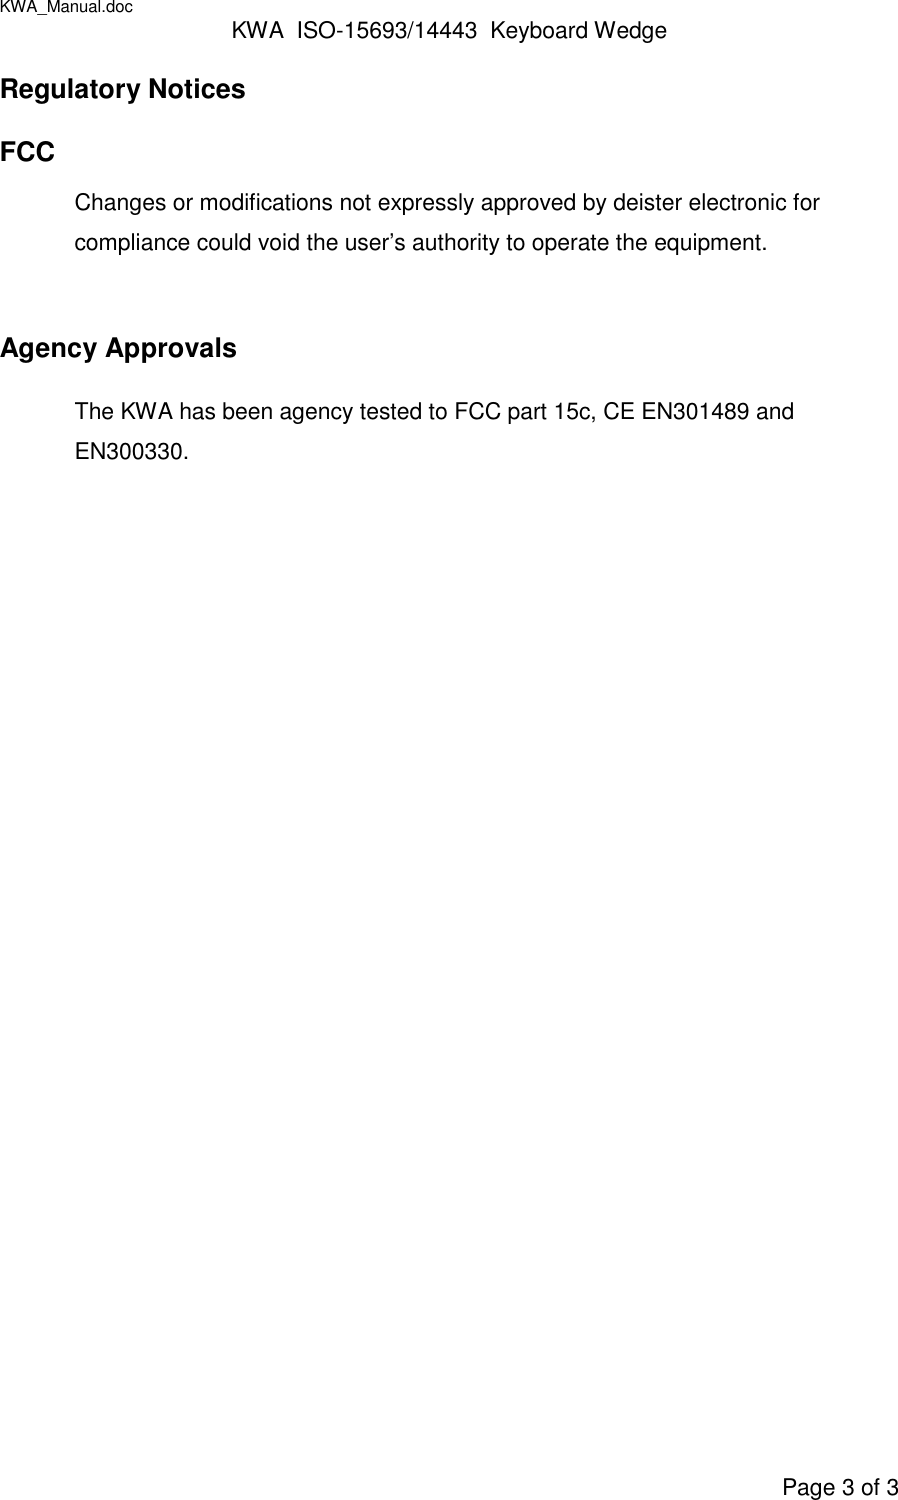 KWA_Manual.doc KWA  ISO-15693/14443  Keyboard WedgePage 3 of 3Regulatory NoticesFCCChanges or modifications not expressly approved by deister electronic forcompliance could void the user’s authority to operate the equipment.Agency ApprovalsThe KWA has been agency tested to FCC part 15c, CE EN301489 andEN300330.